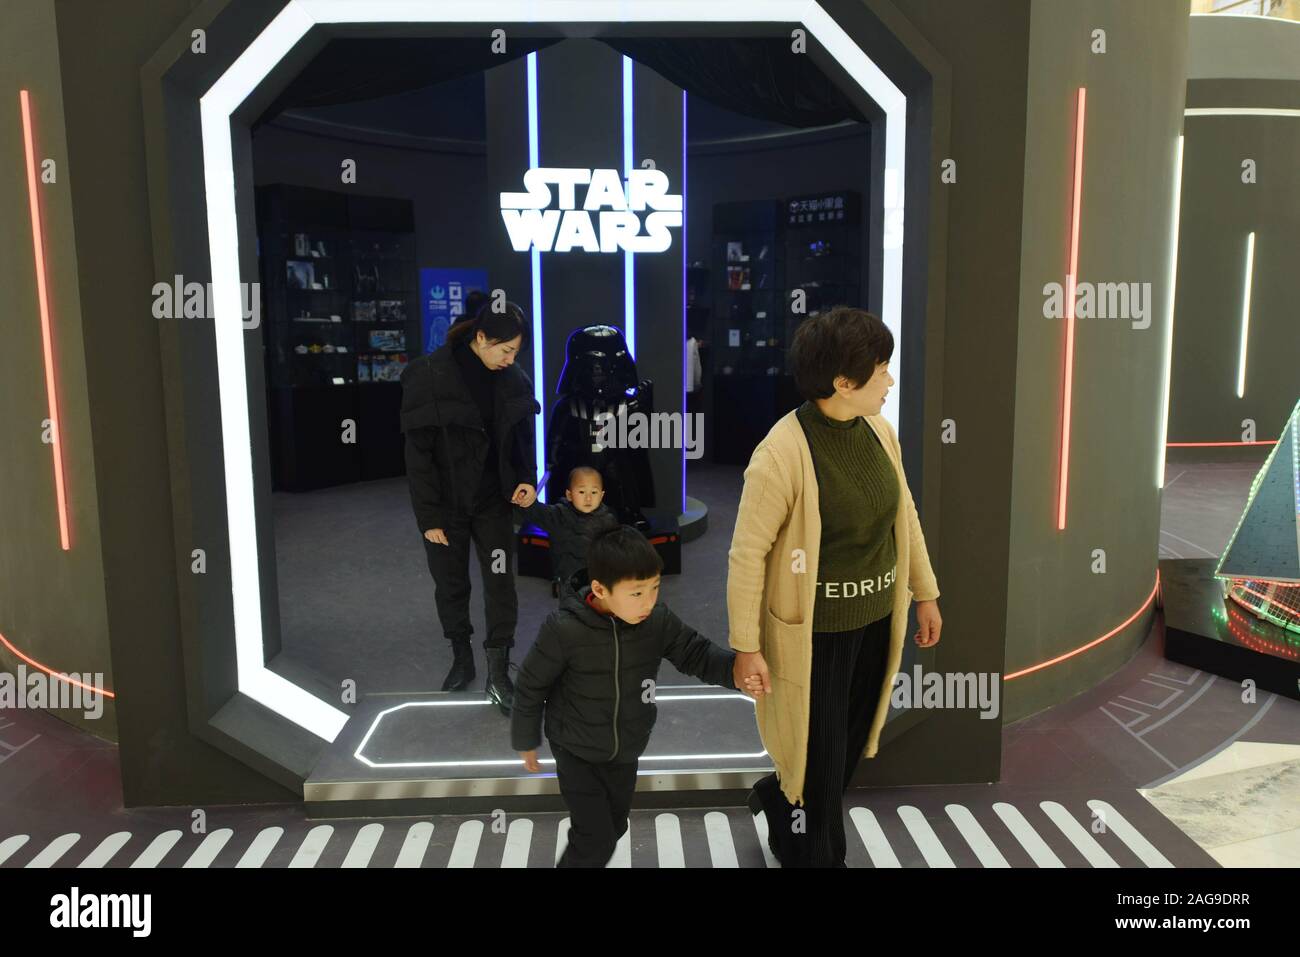 Zhejiang, Zhejiang, China. 18th Dec, 2019. Zhejiang, CHINA-Star Wars: The Rise of Skywalker hits theaters Dec. 20, 2019.A shopping mall in Hangzhou, east China's Zhejiang province, has launched a special Star Wars exhibition, which has attracted many Star Wars fans to watch the exhibition and learn more about Star Wars. Credit: SIPA Asia/ZUMA Wire/Alamy Live News Stock Photo